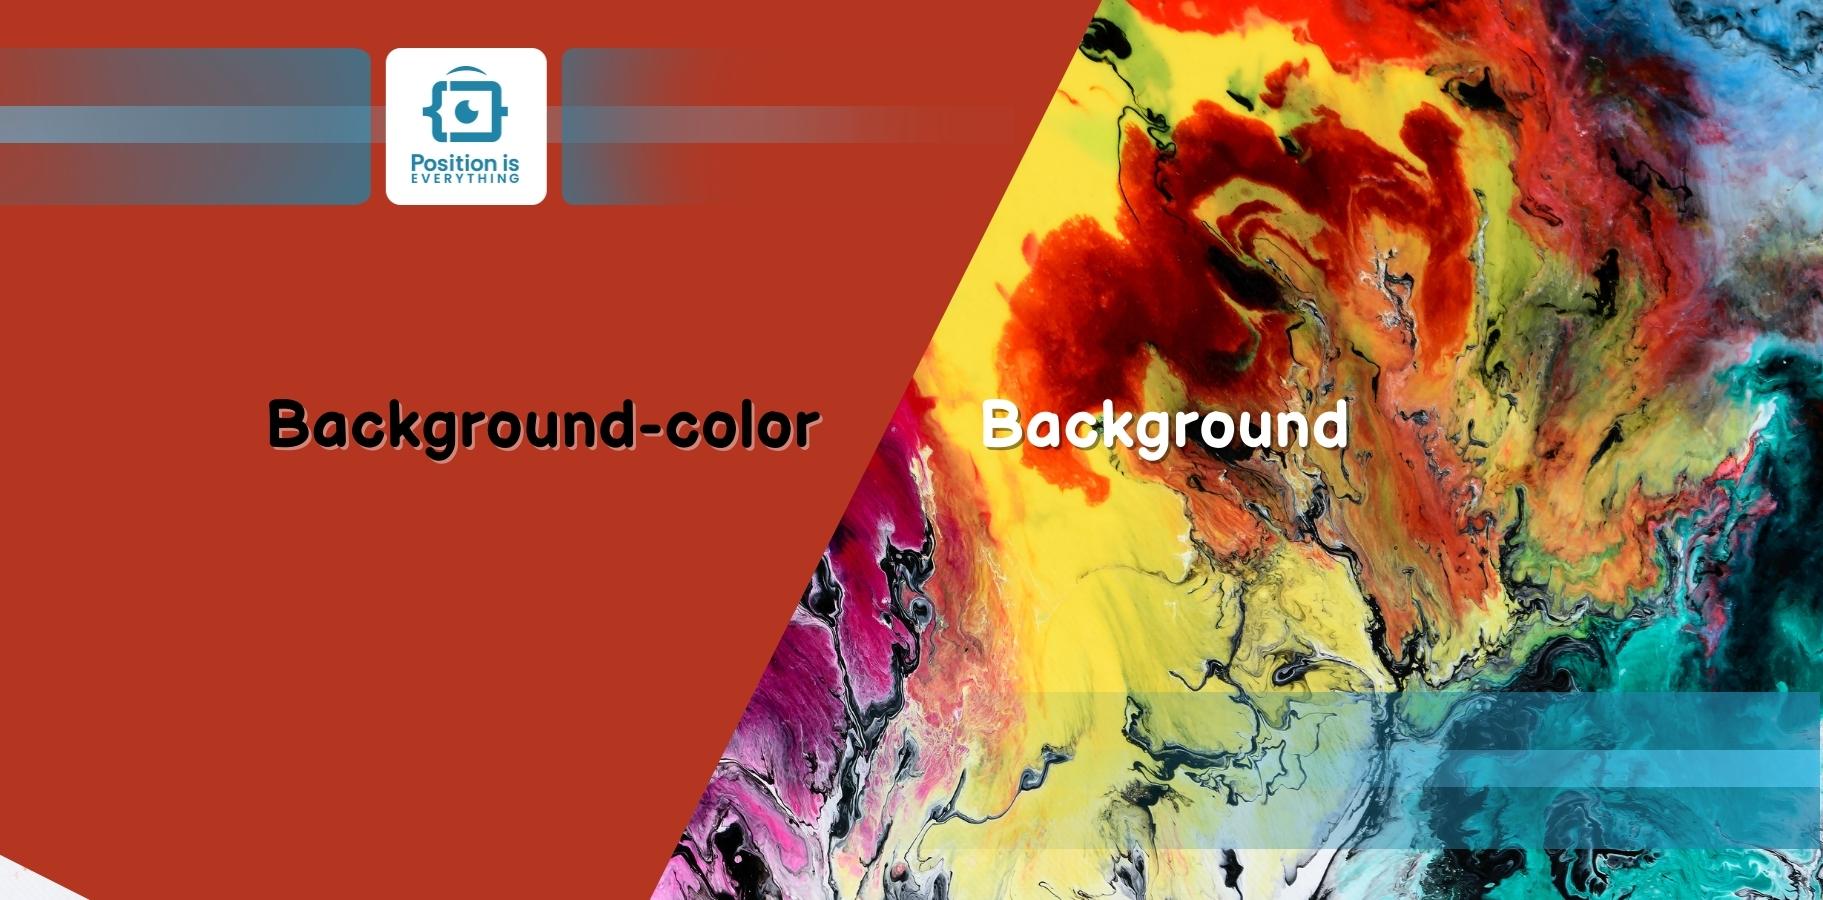 CSS Background vs Background-color: What Is the Difference Between Them?